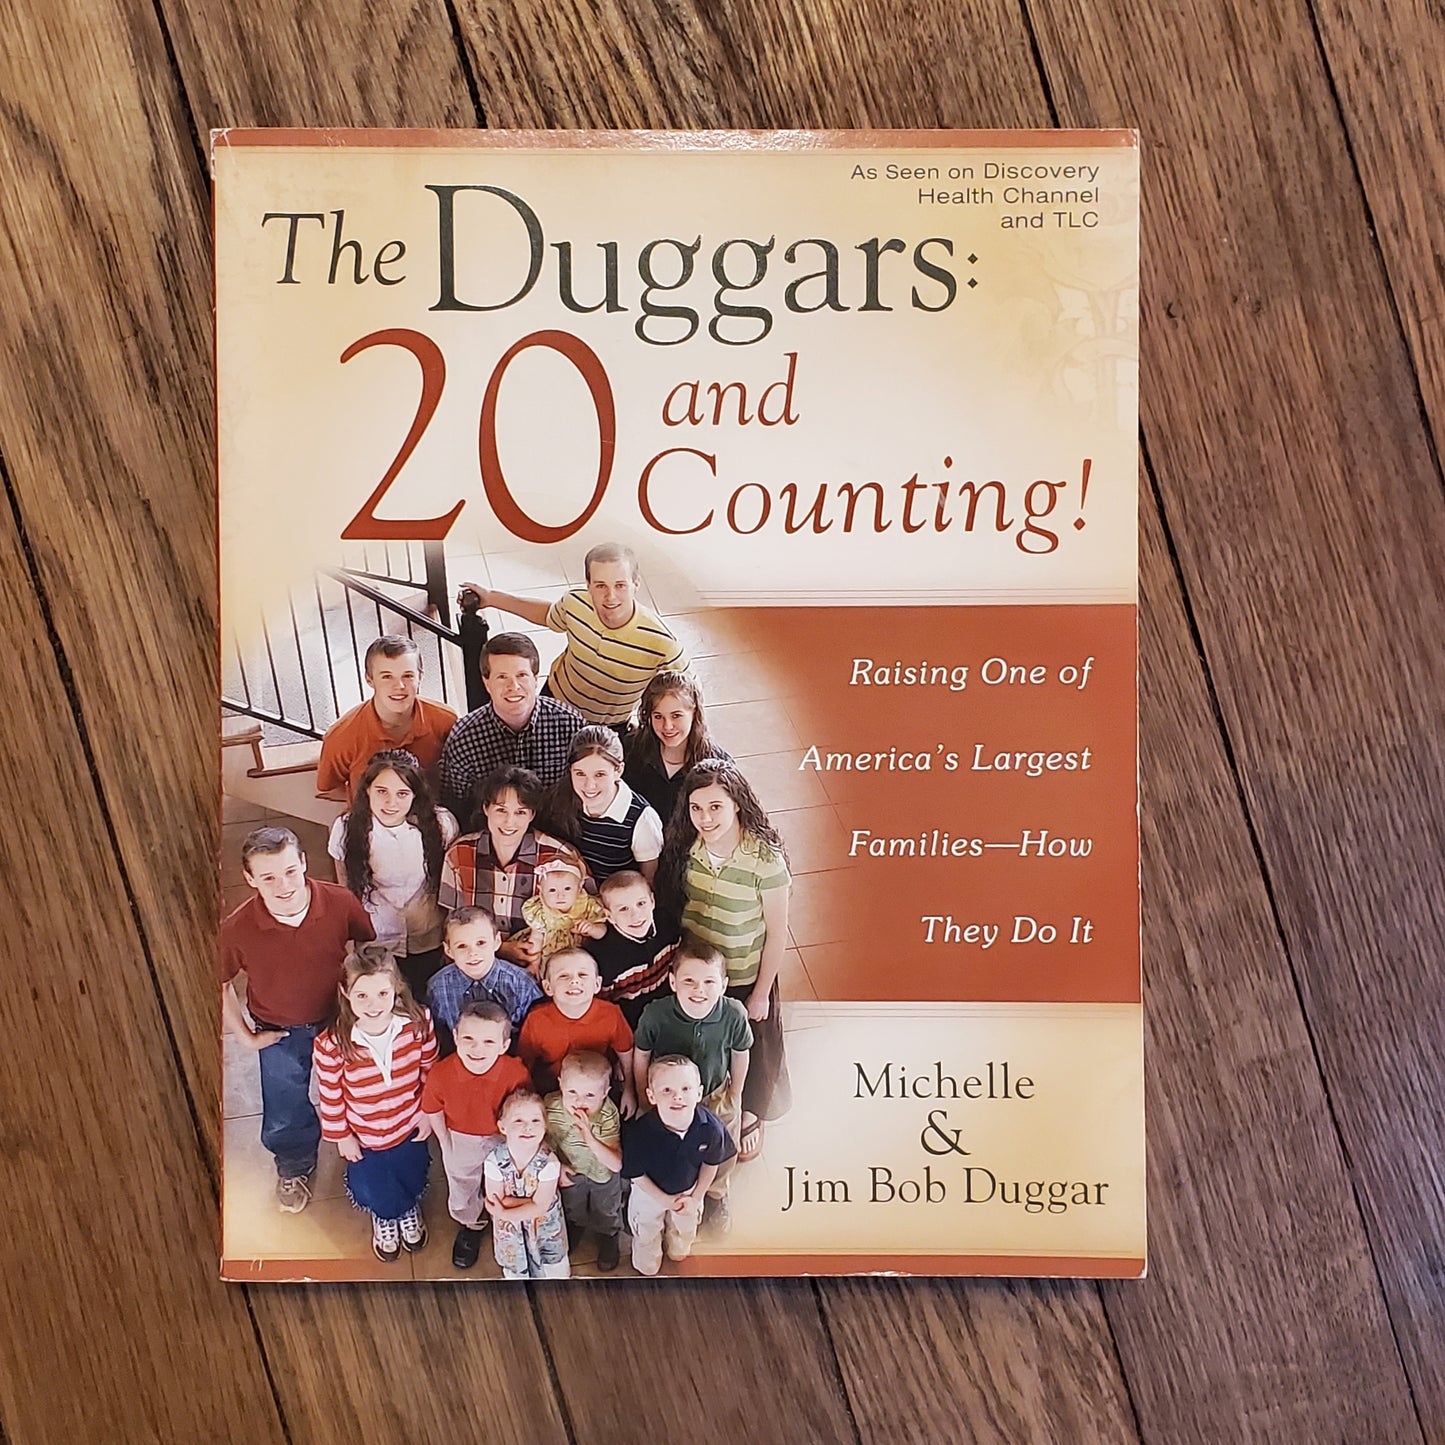 GB Used The Duggars: 20 and Counting